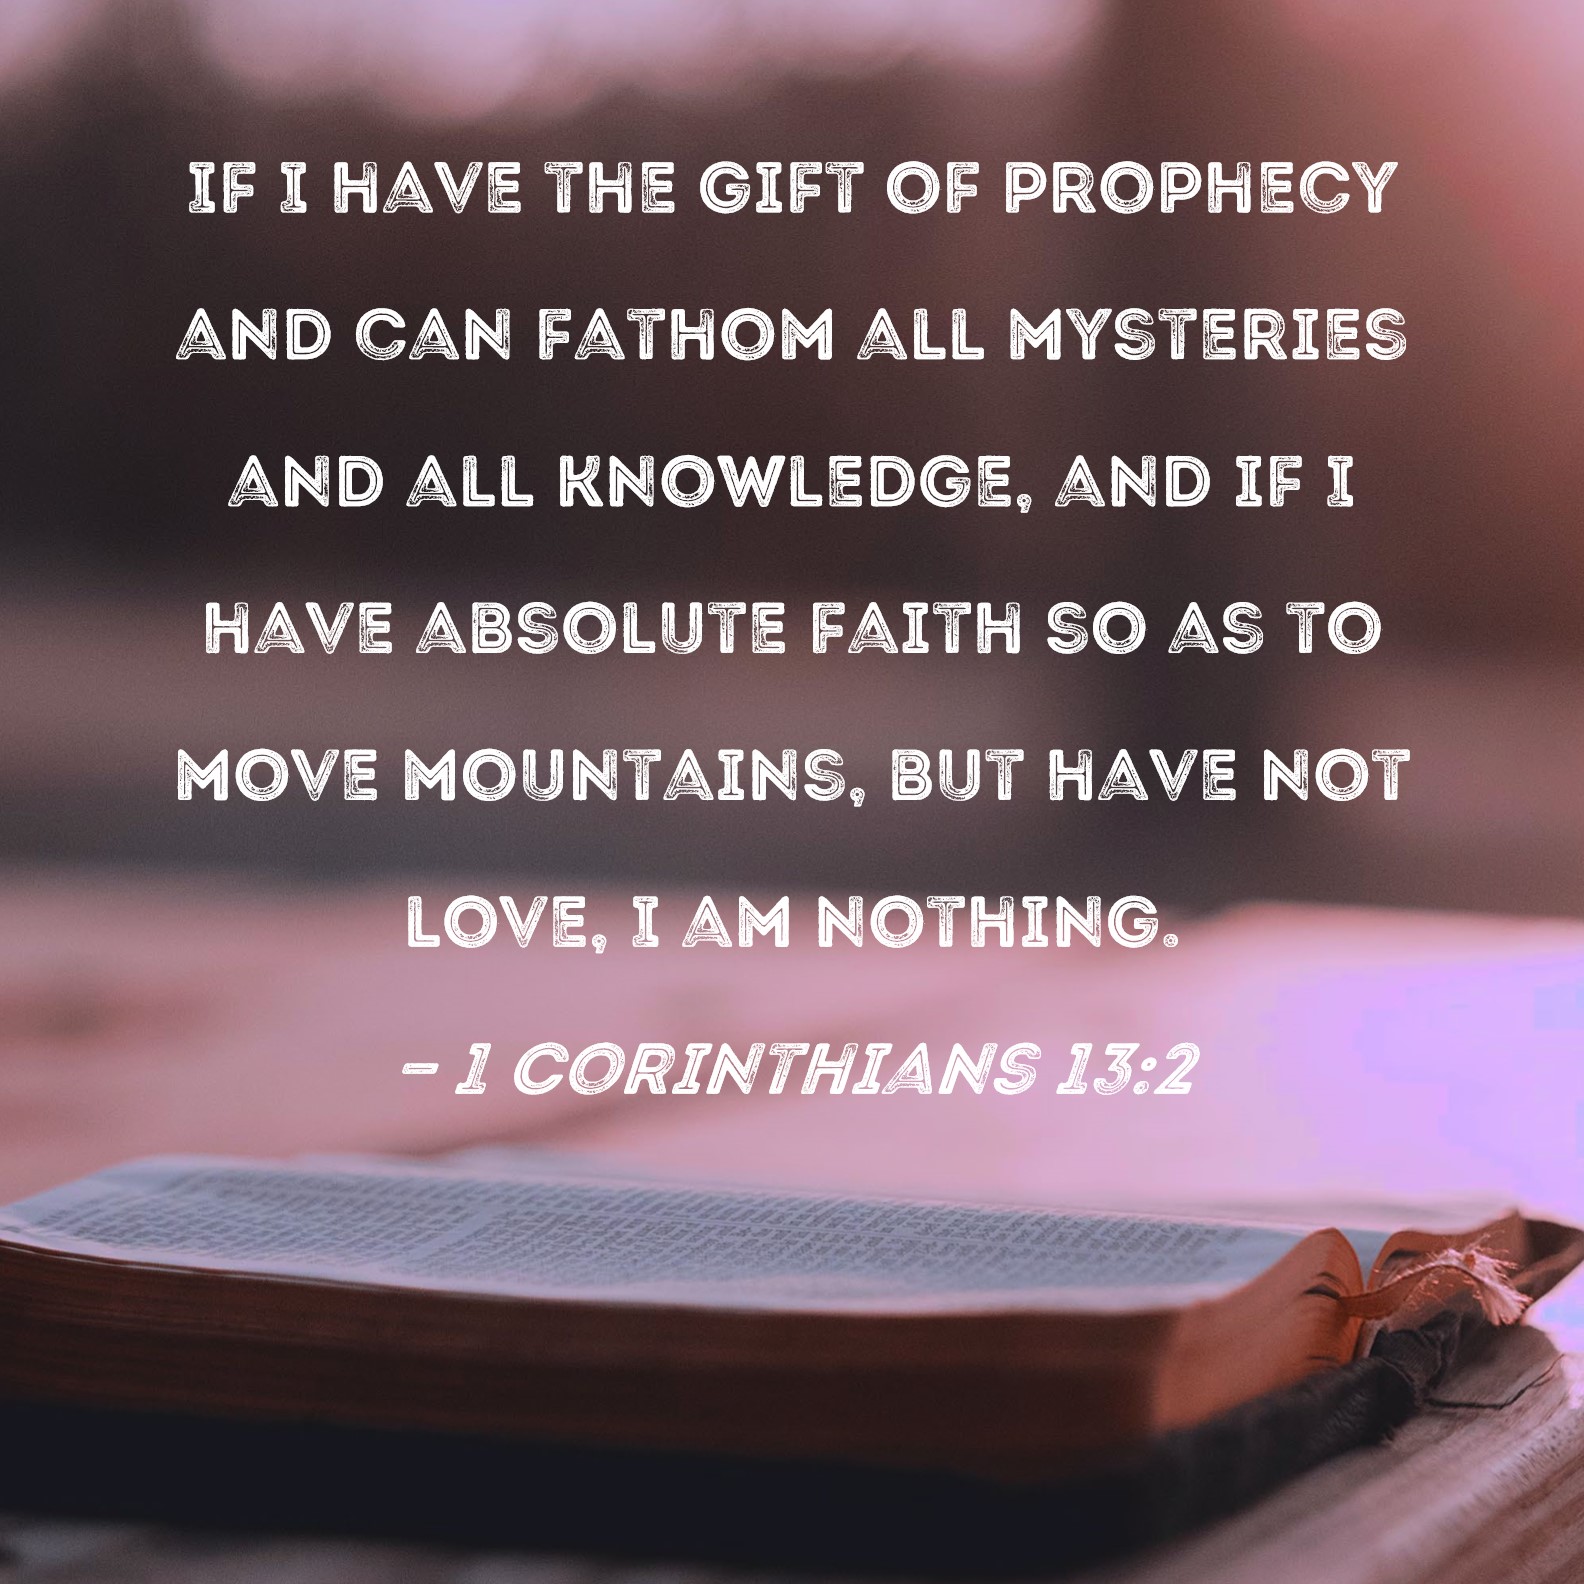 1-corinthians-13-2-if-i-have-the-gift-of-prophecy-and-can-fathom-all-mysteries-and-all-knowledge